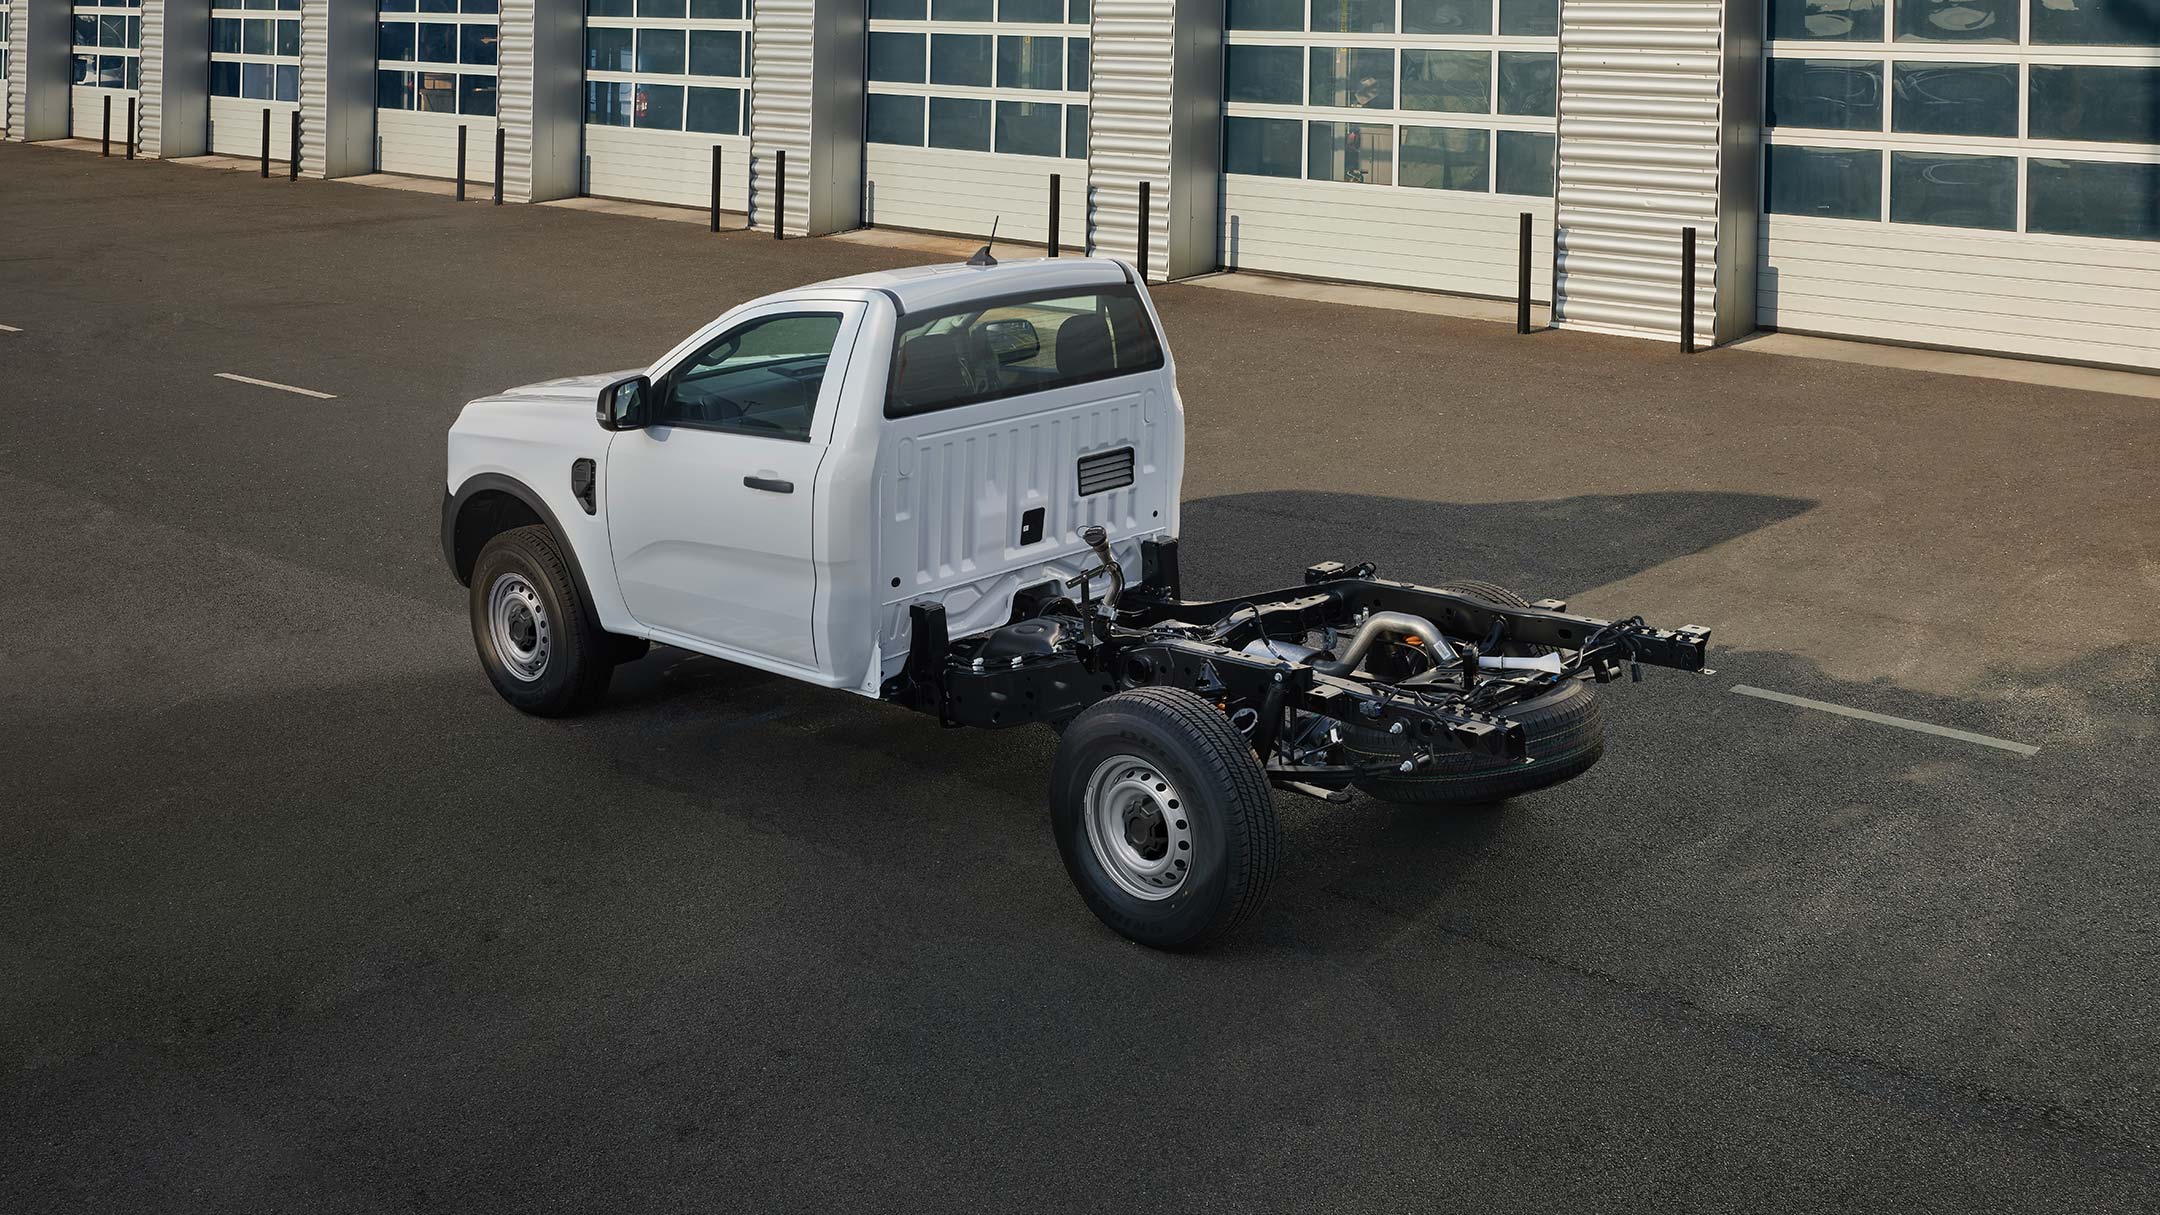 Ford Ranger Chassis Cab next to garages